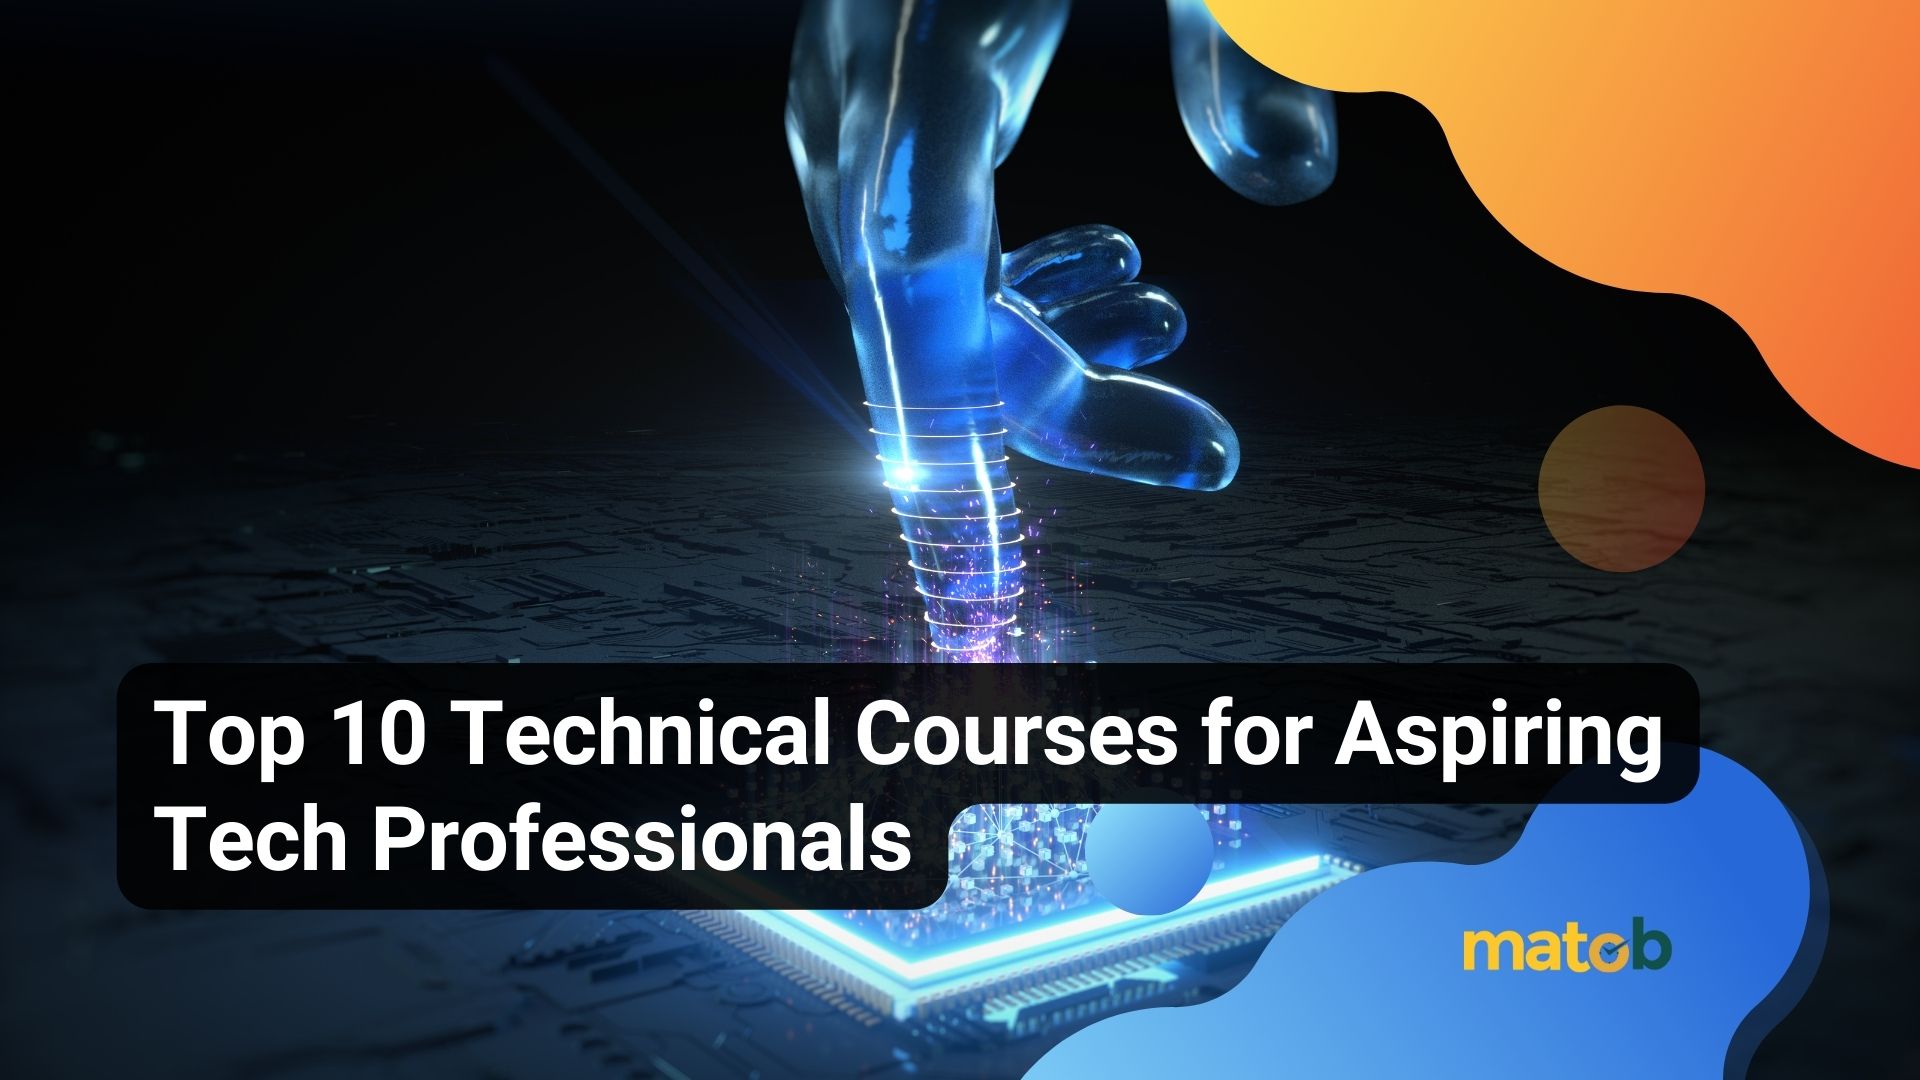 Top 10 Technical Courses for Aspiring Tech Professionals